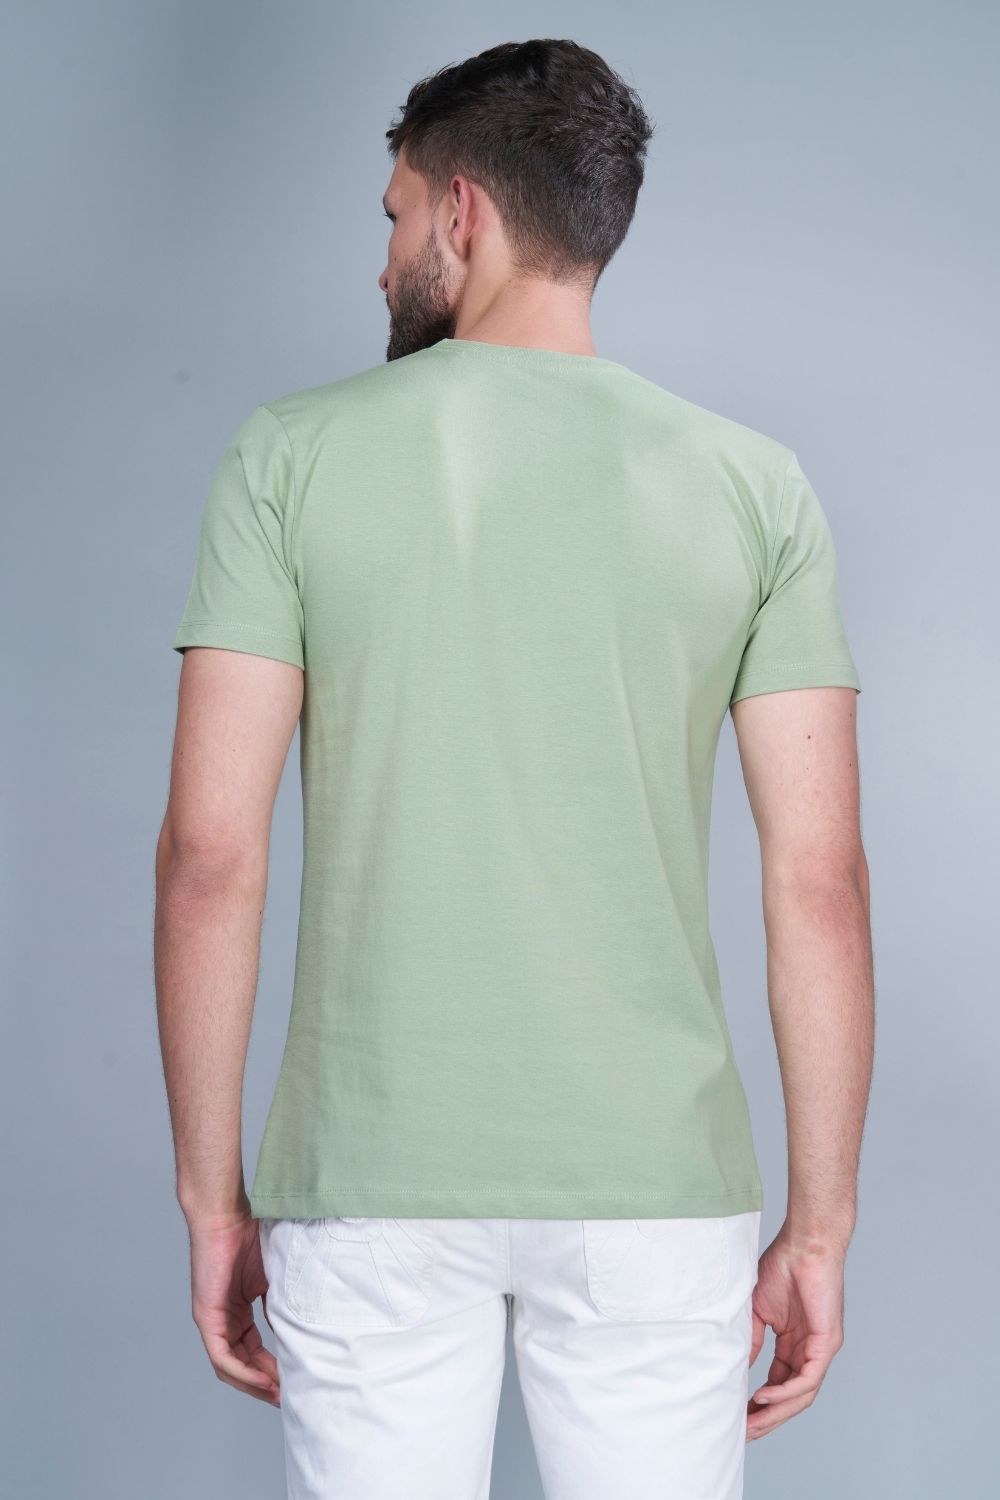 Green colored, cotton Graphic T shirt for men with half sleeves and round neck, back view.